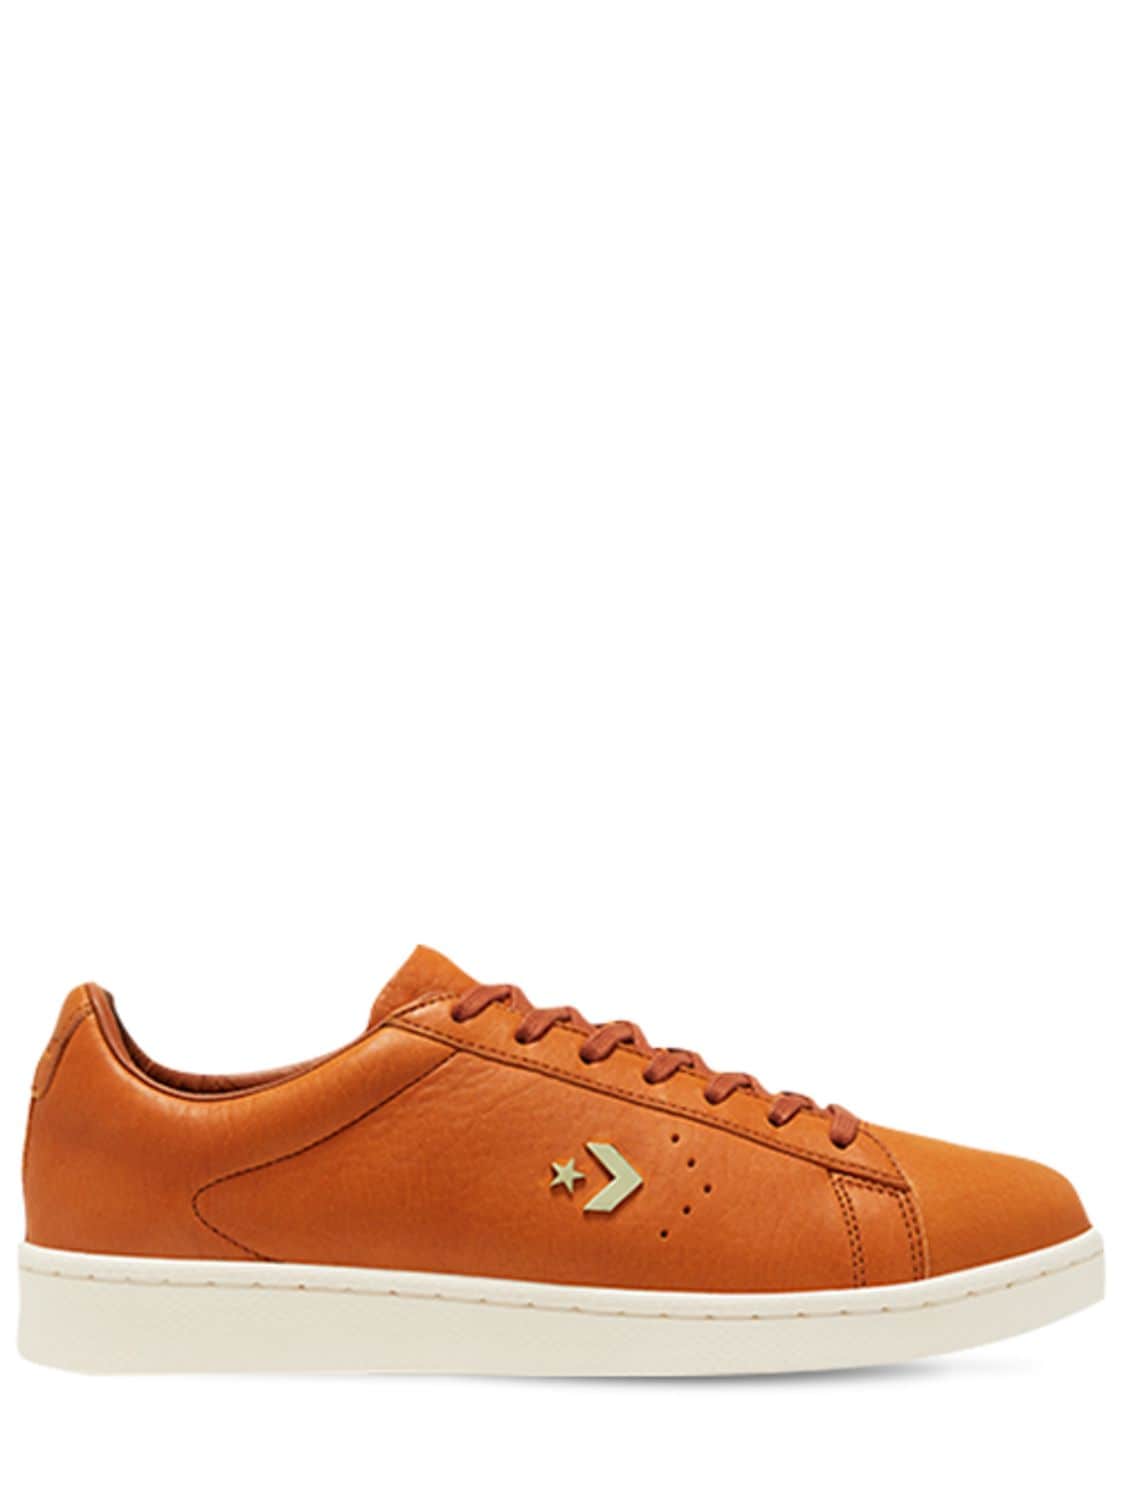 Horween Premium Pro Leather Ox Sneakers